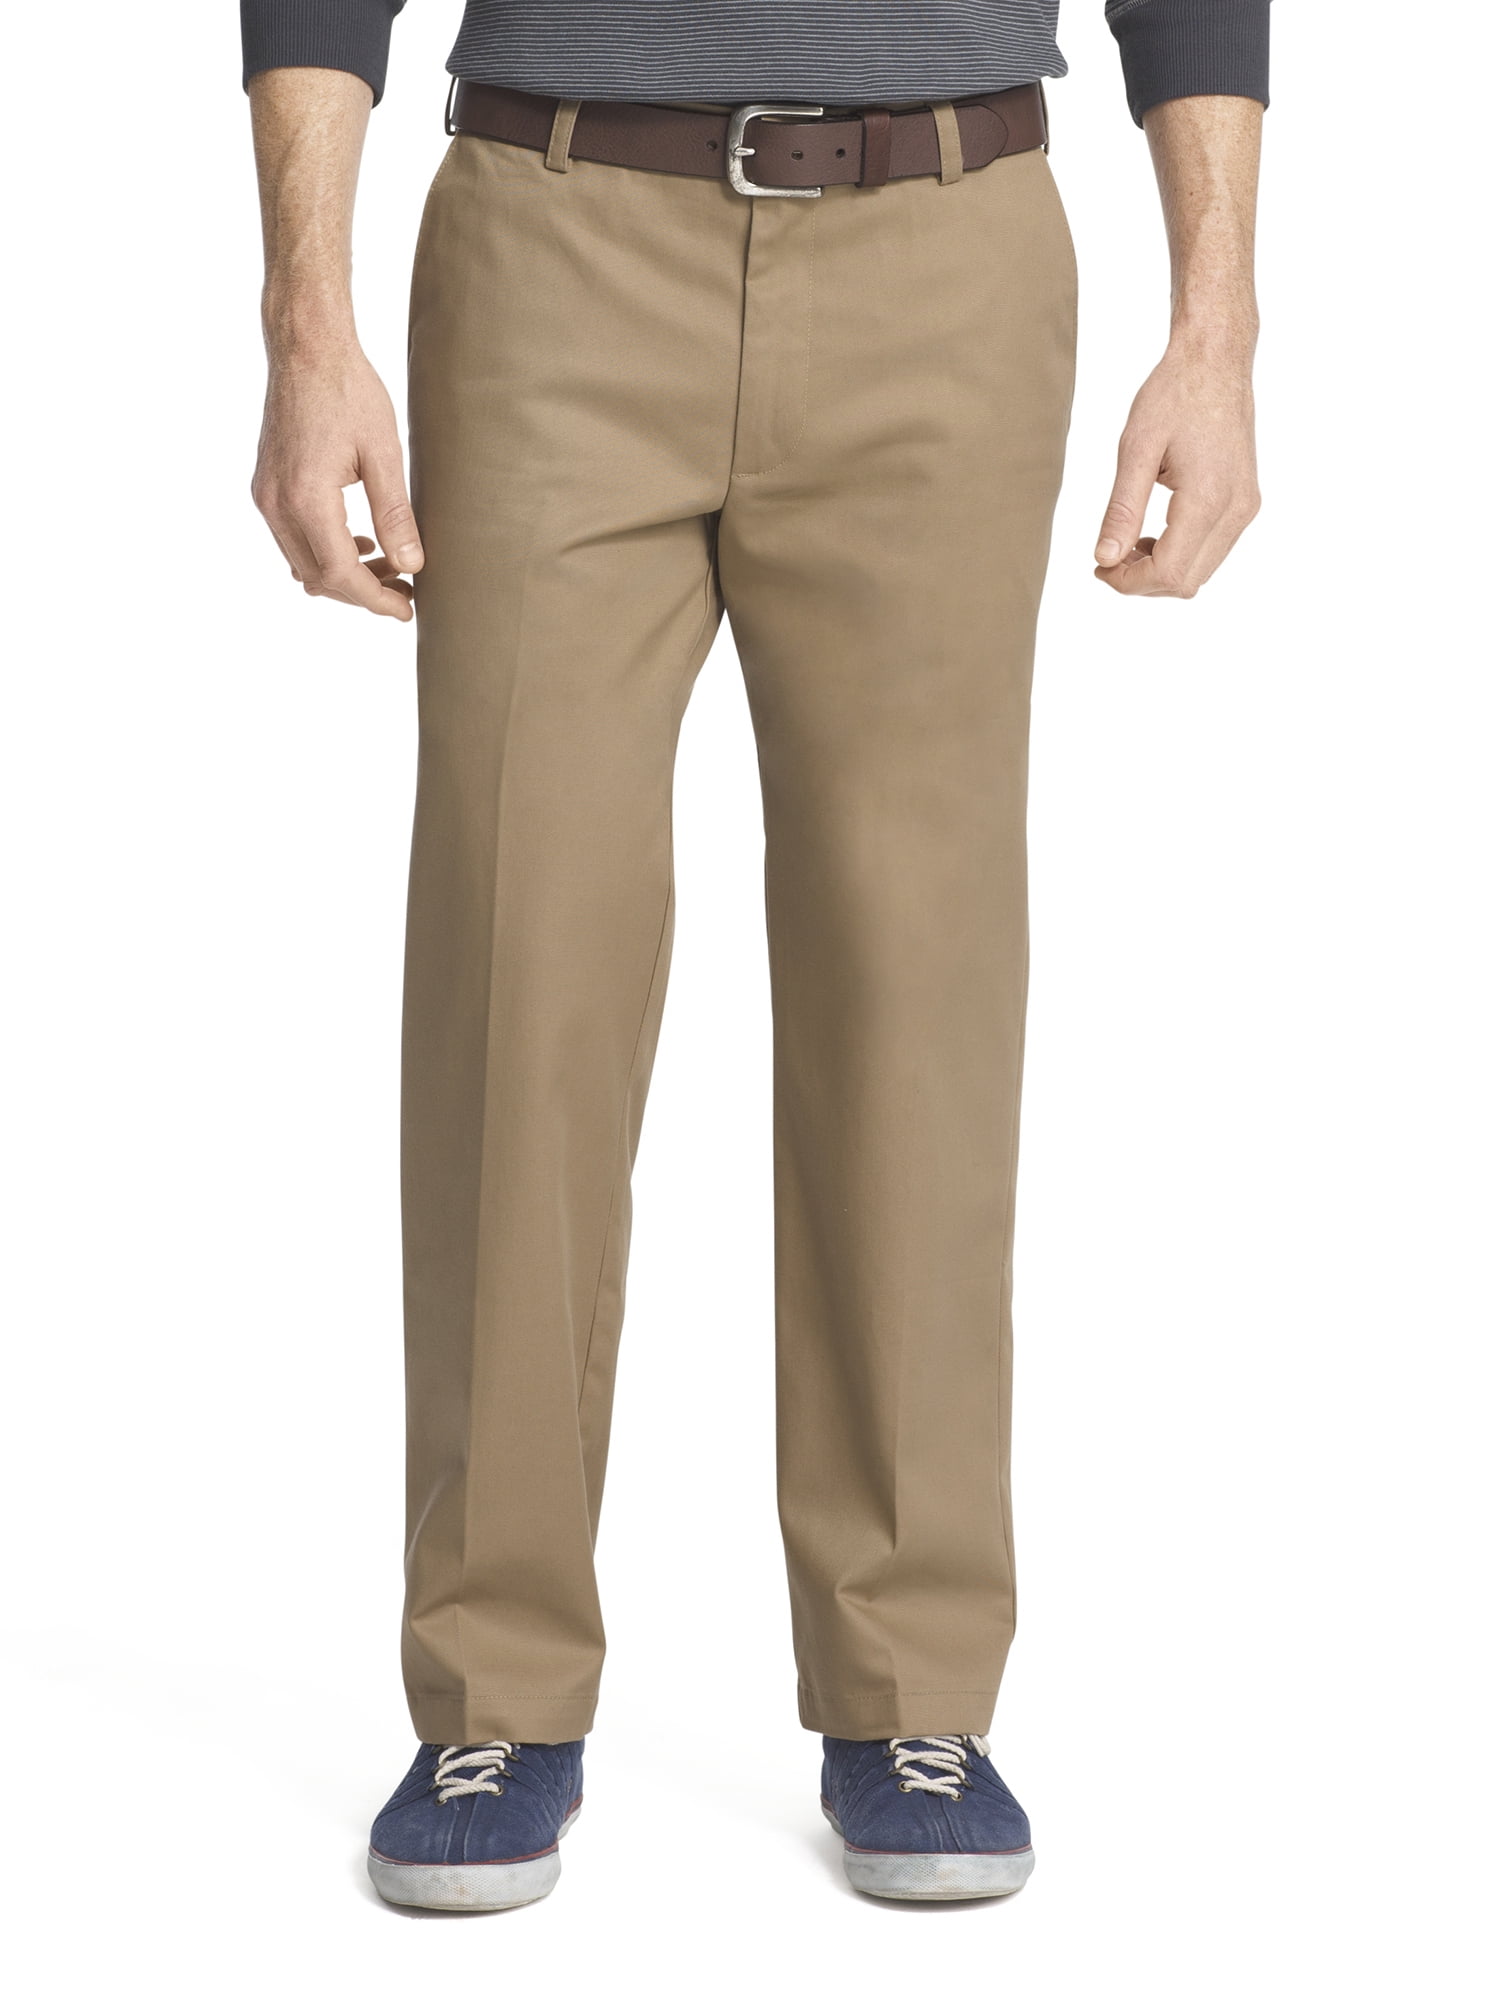 IZOD Mens American Chino Flat Front Classic Fit Pant